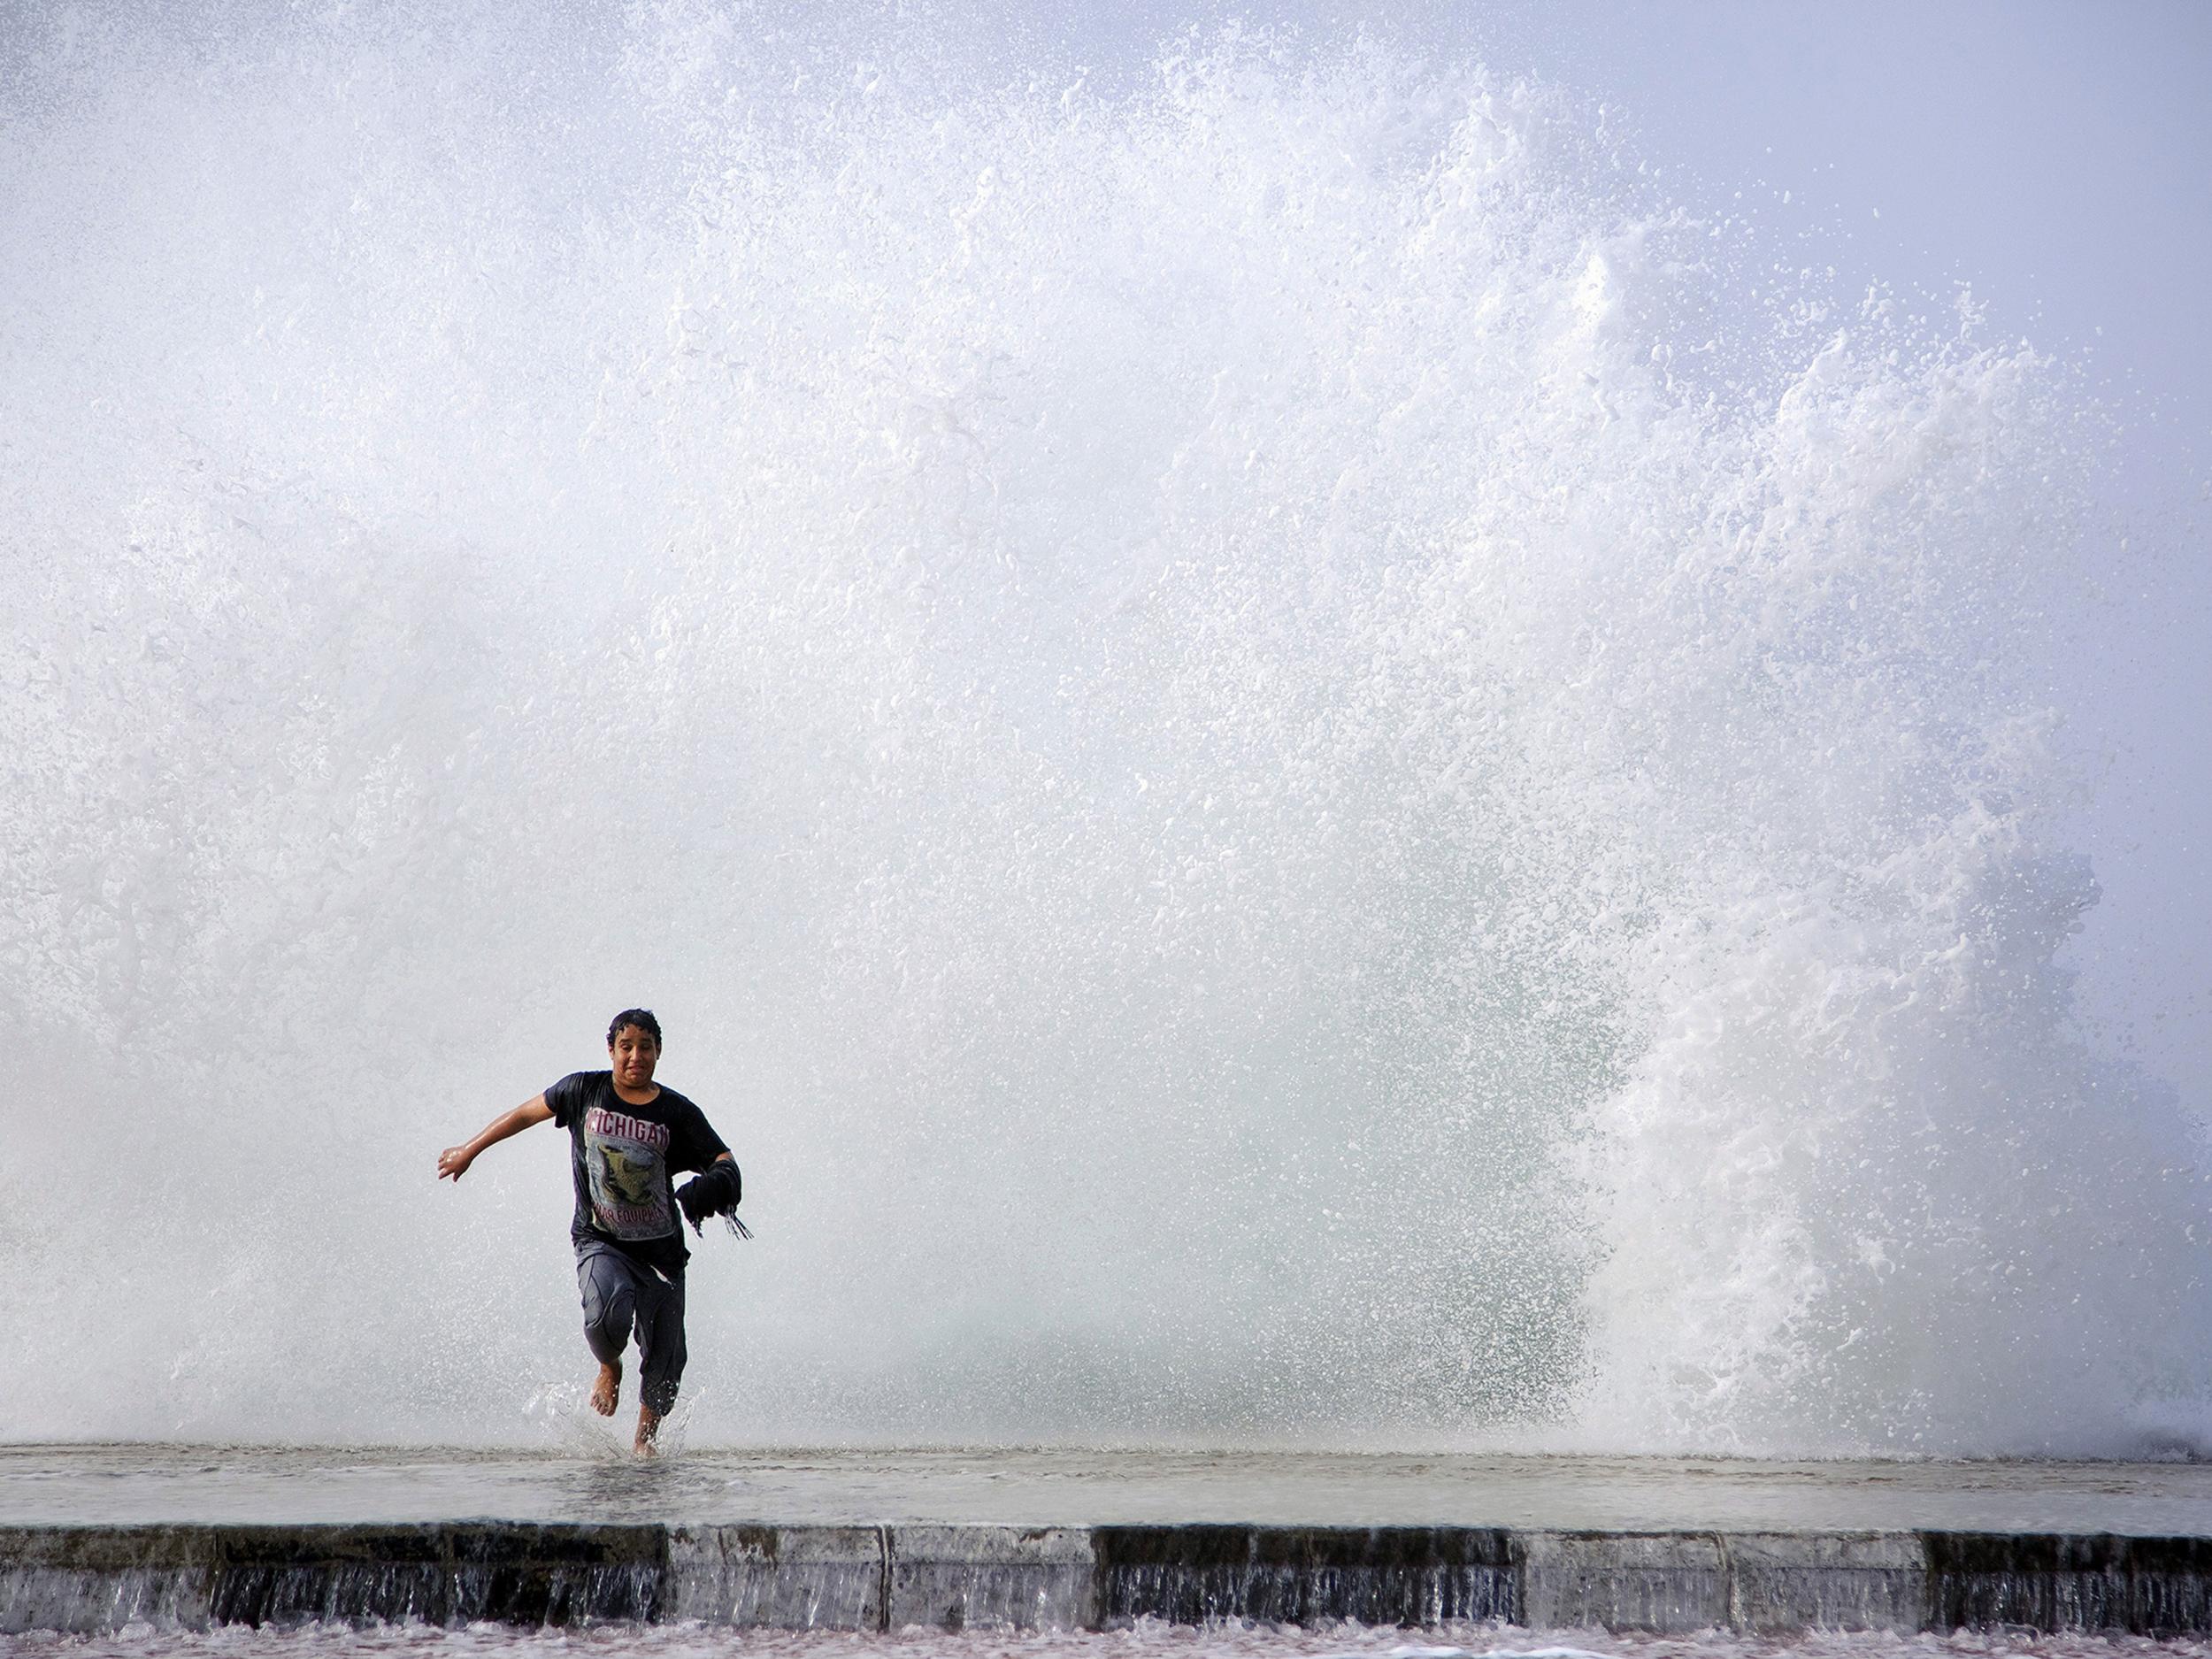 A Saudi man runs in front of a big wave as high winds batter the coast on February 11, 2015 in the Saudi Red Sea port city of Dhuba, located in Tabuk Province, northwest of the Saudi capital Riyadh.